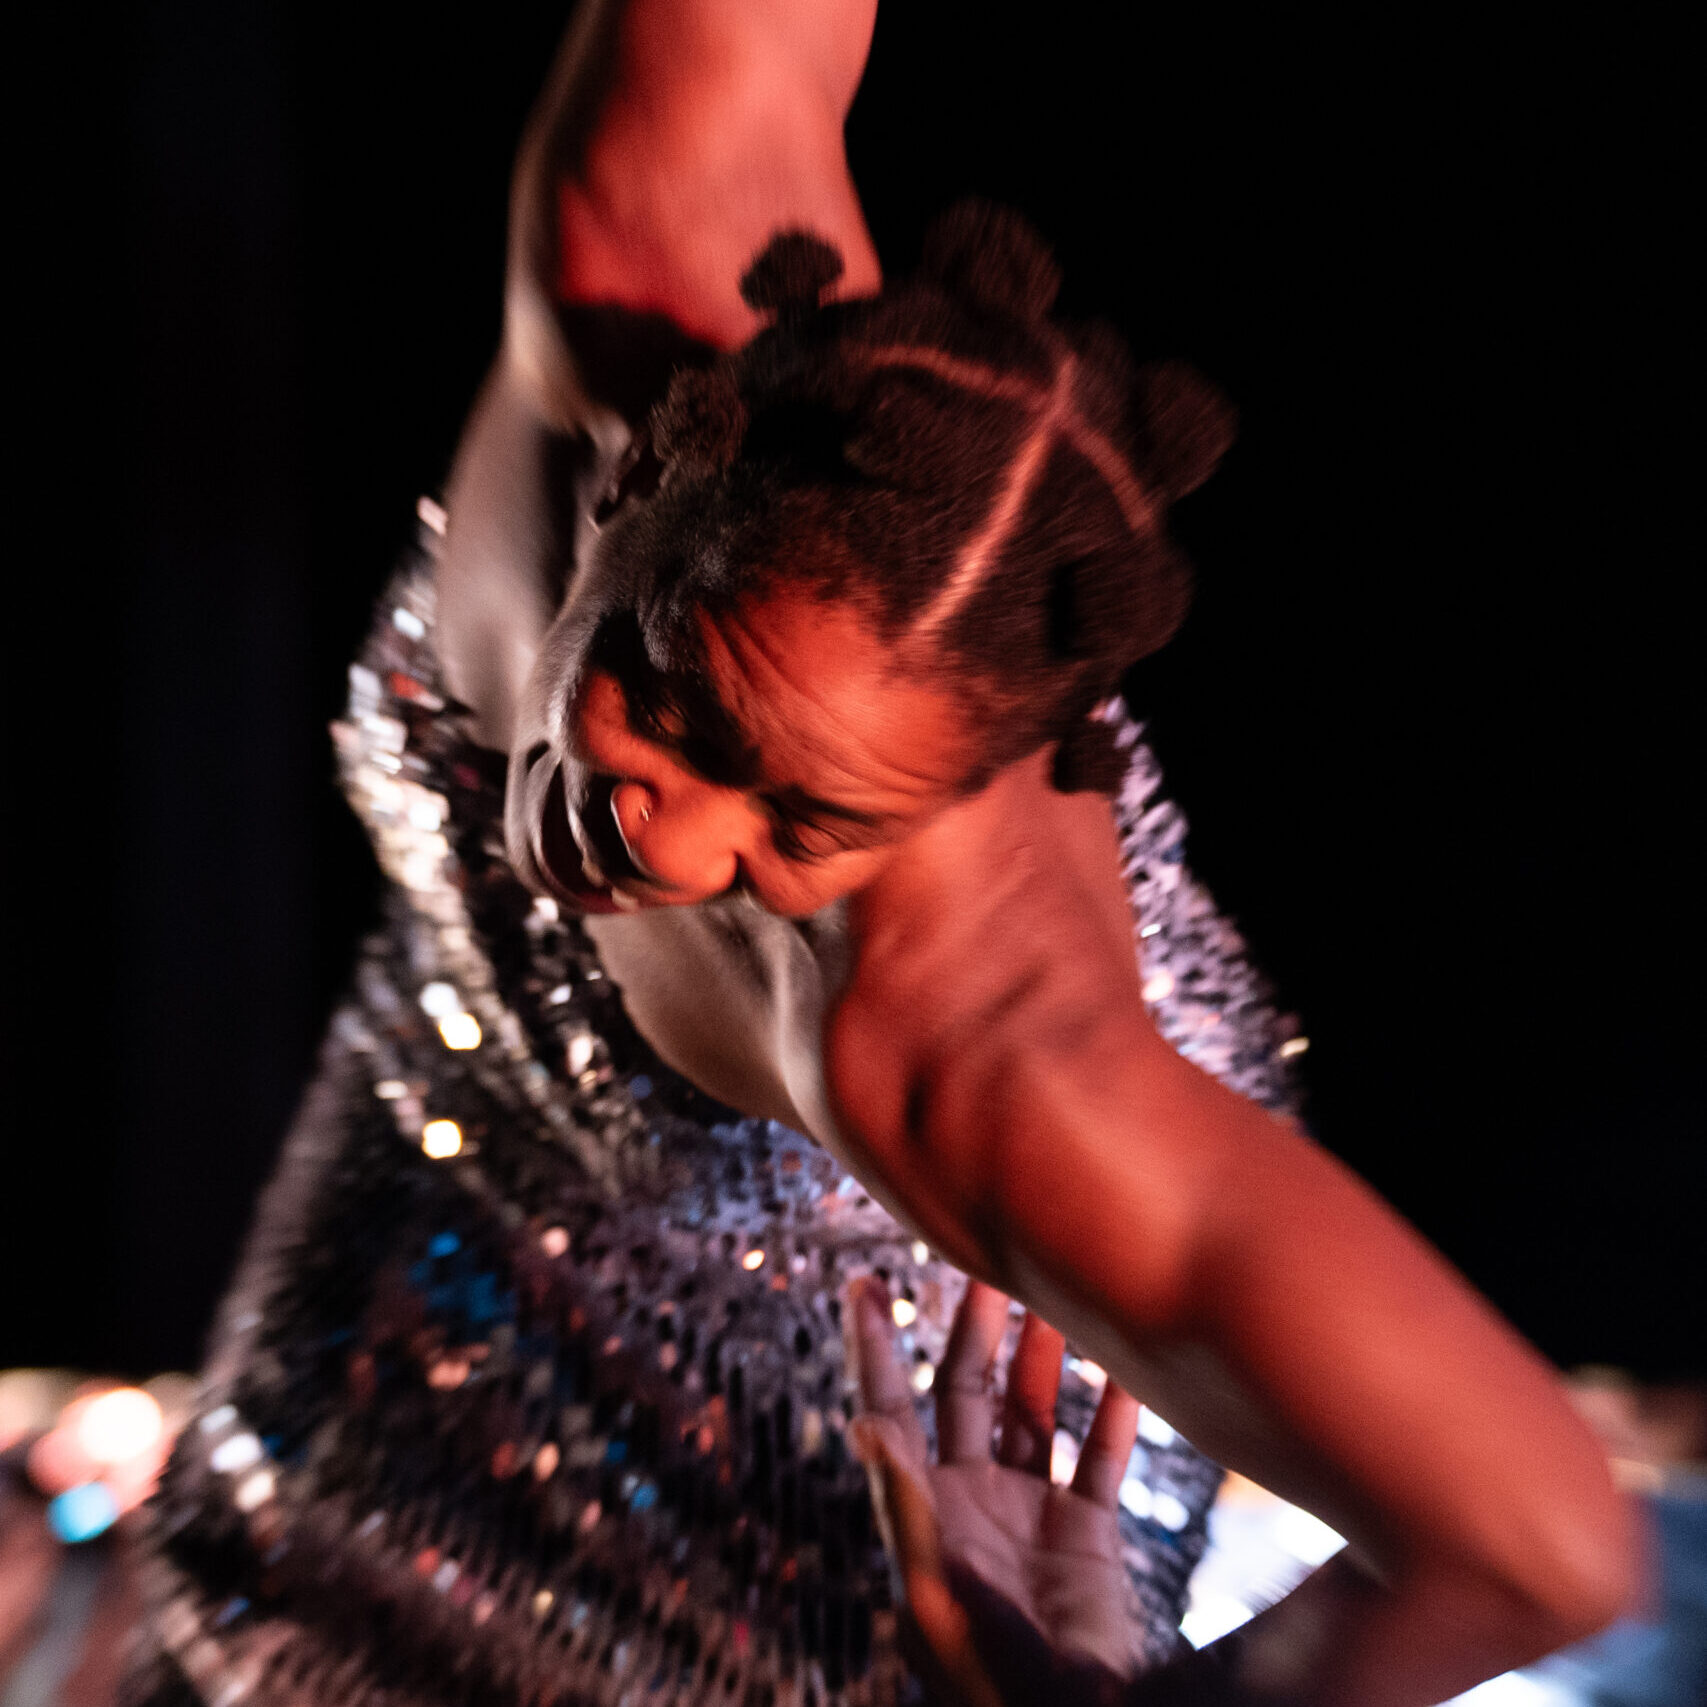 mayfield brooks, a chestnut brown skinned individual, wears sparkly dress moving toward the camera with the arms extended like wing. The background is black and the image is vertical.